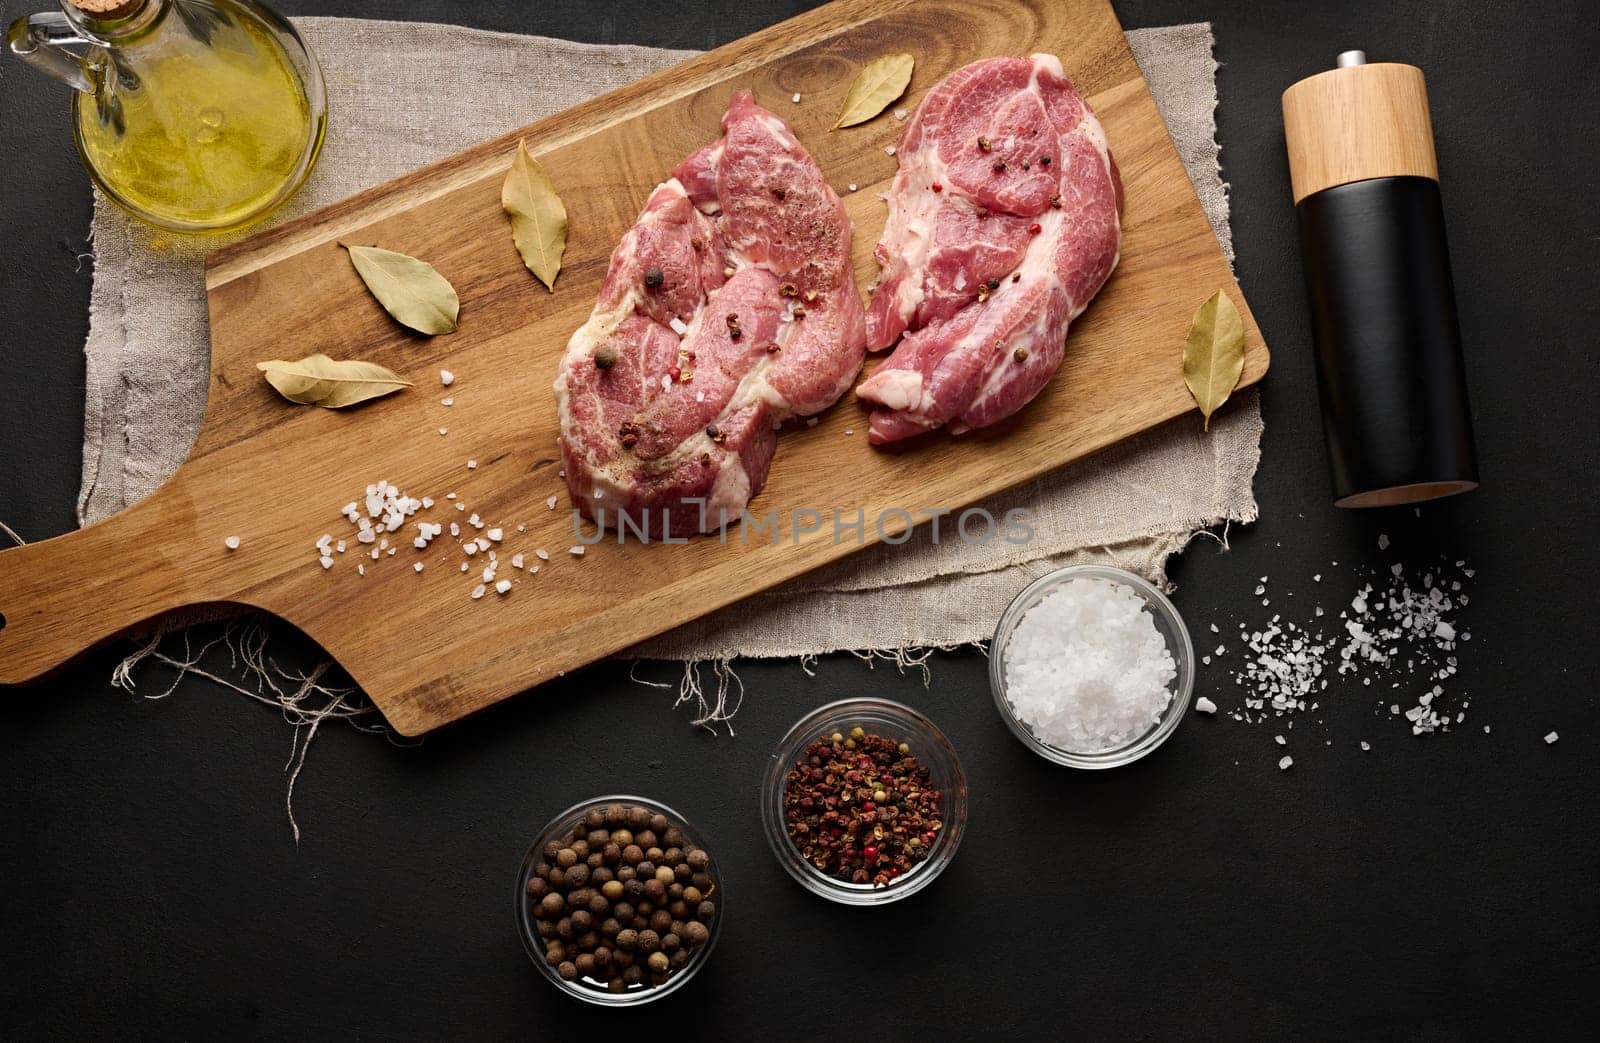 Two raw pork neck steaks on a board and spices for cooking. Top view of black table. Copy space